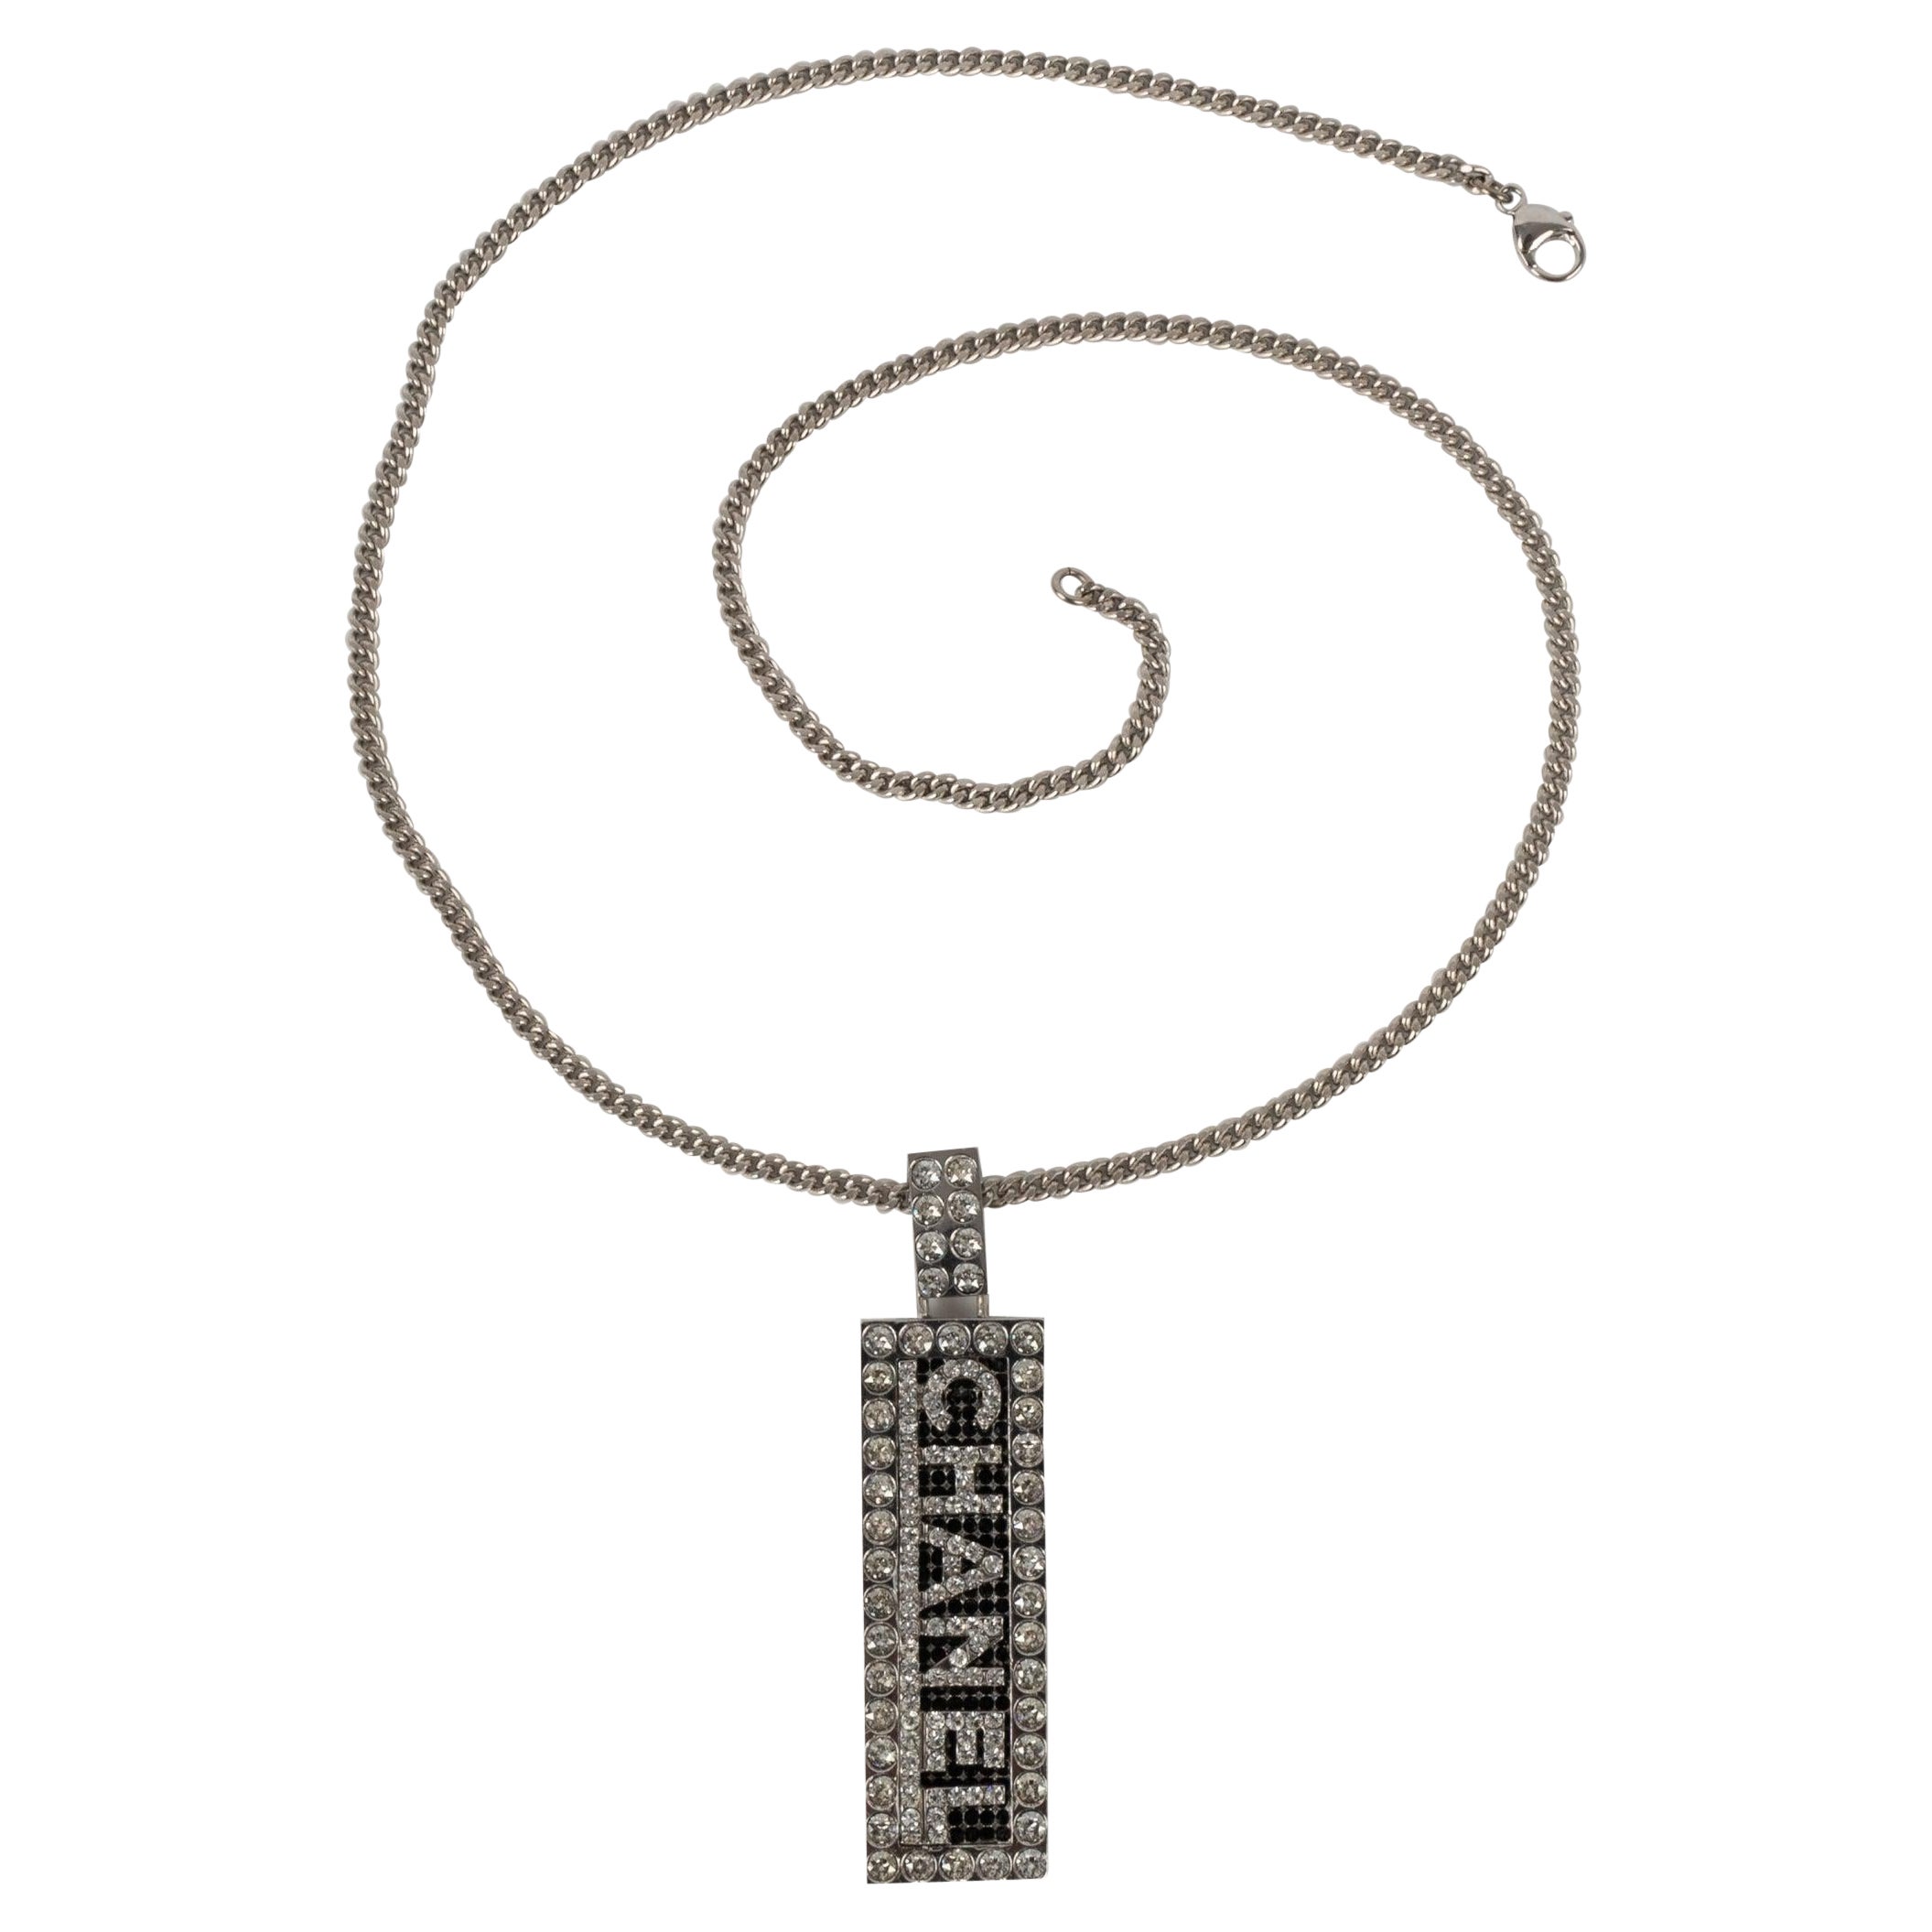 Chanel Silvery Metal Necklace with a Swarovski Rhinestone Pendant, Fall 2003 For Sale